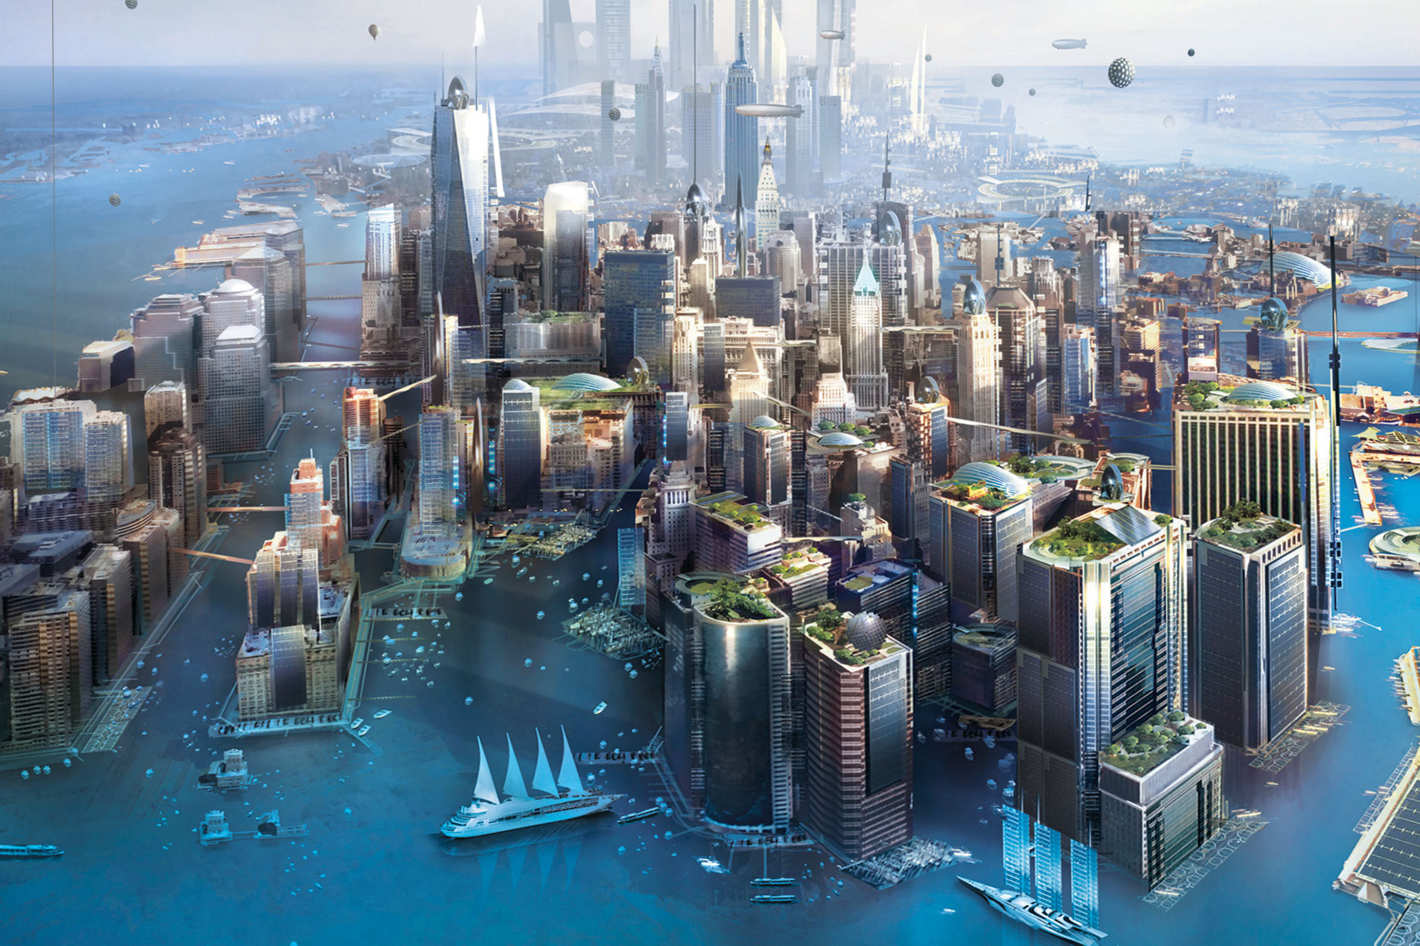 Cover of New York 2140. Illustration by Stephan Martiniere. Design by Kirk Benshoff.